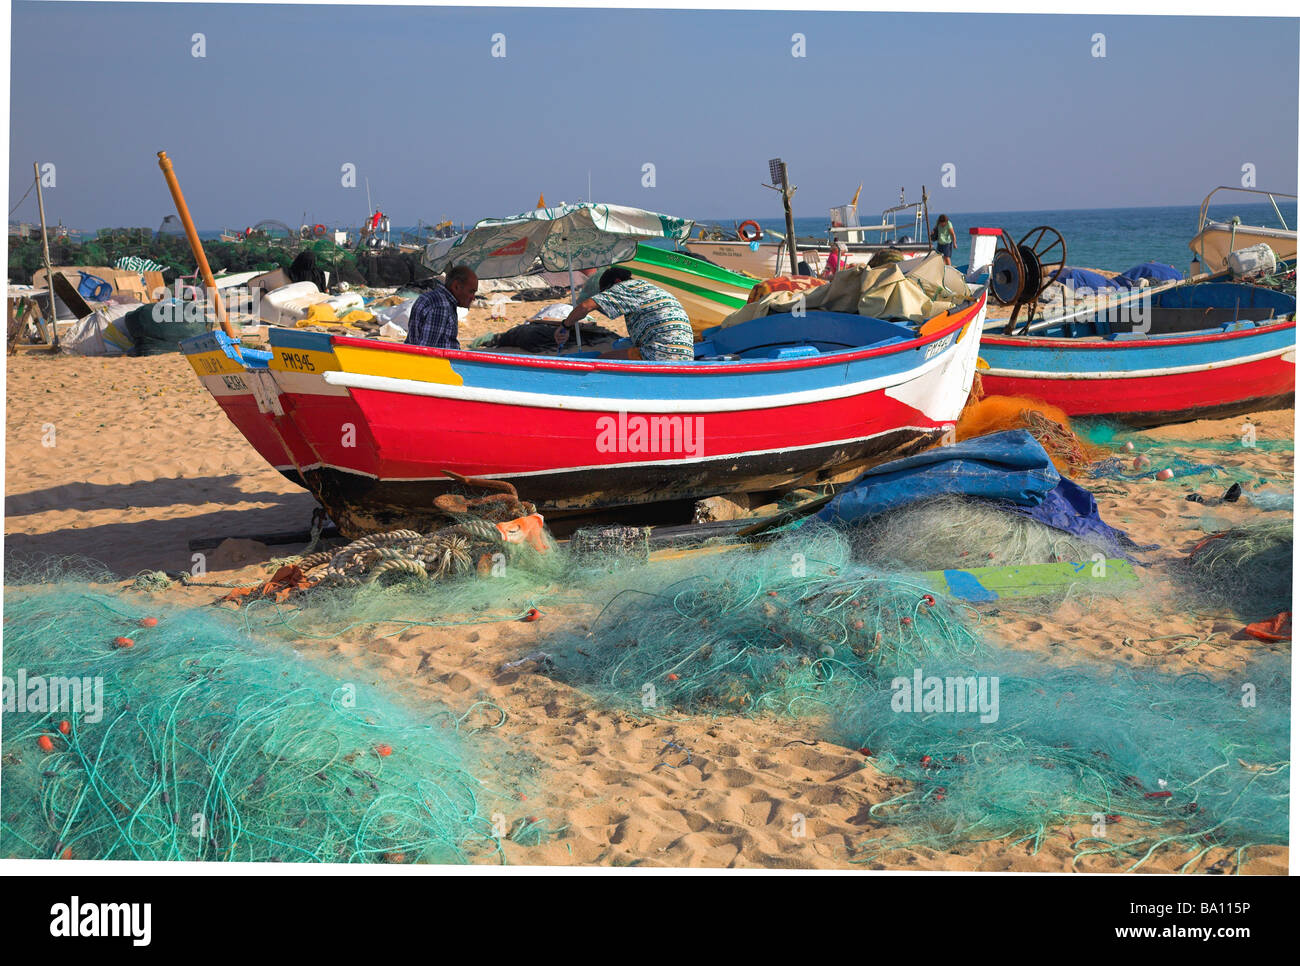 Fishing boats on the beach at Olhos D'Agua, Algarve Stock Photo